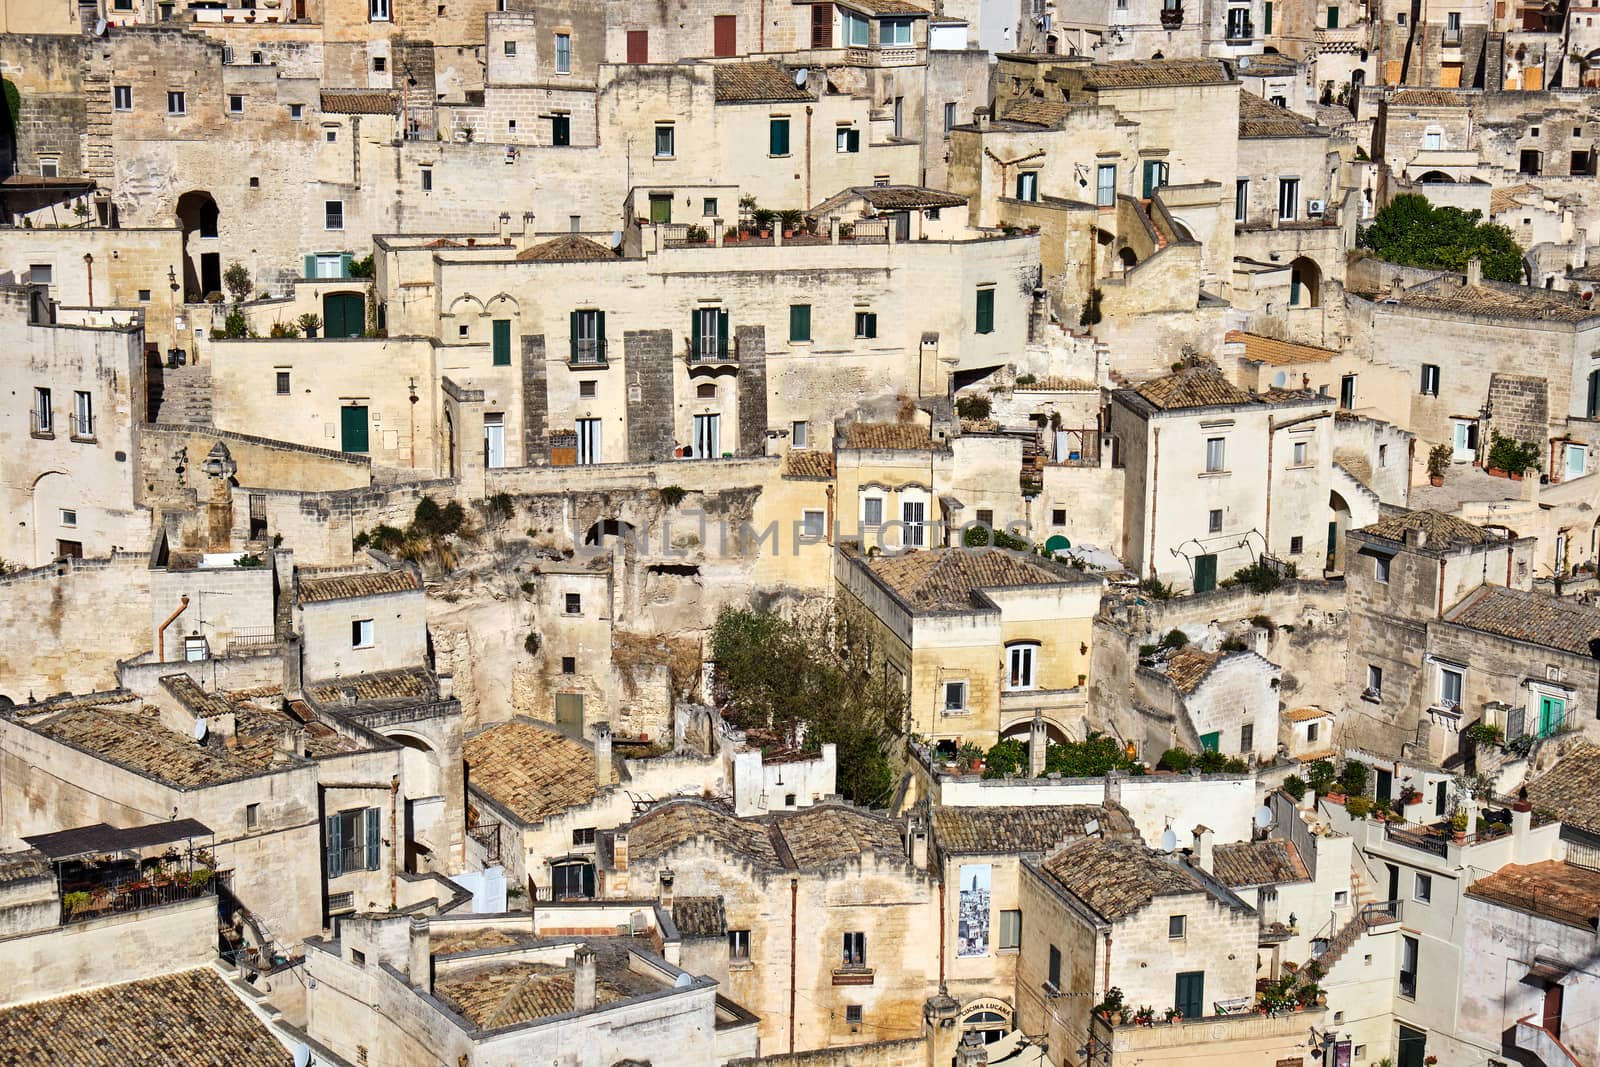 Detail of the old houses of Matera in southern Italy